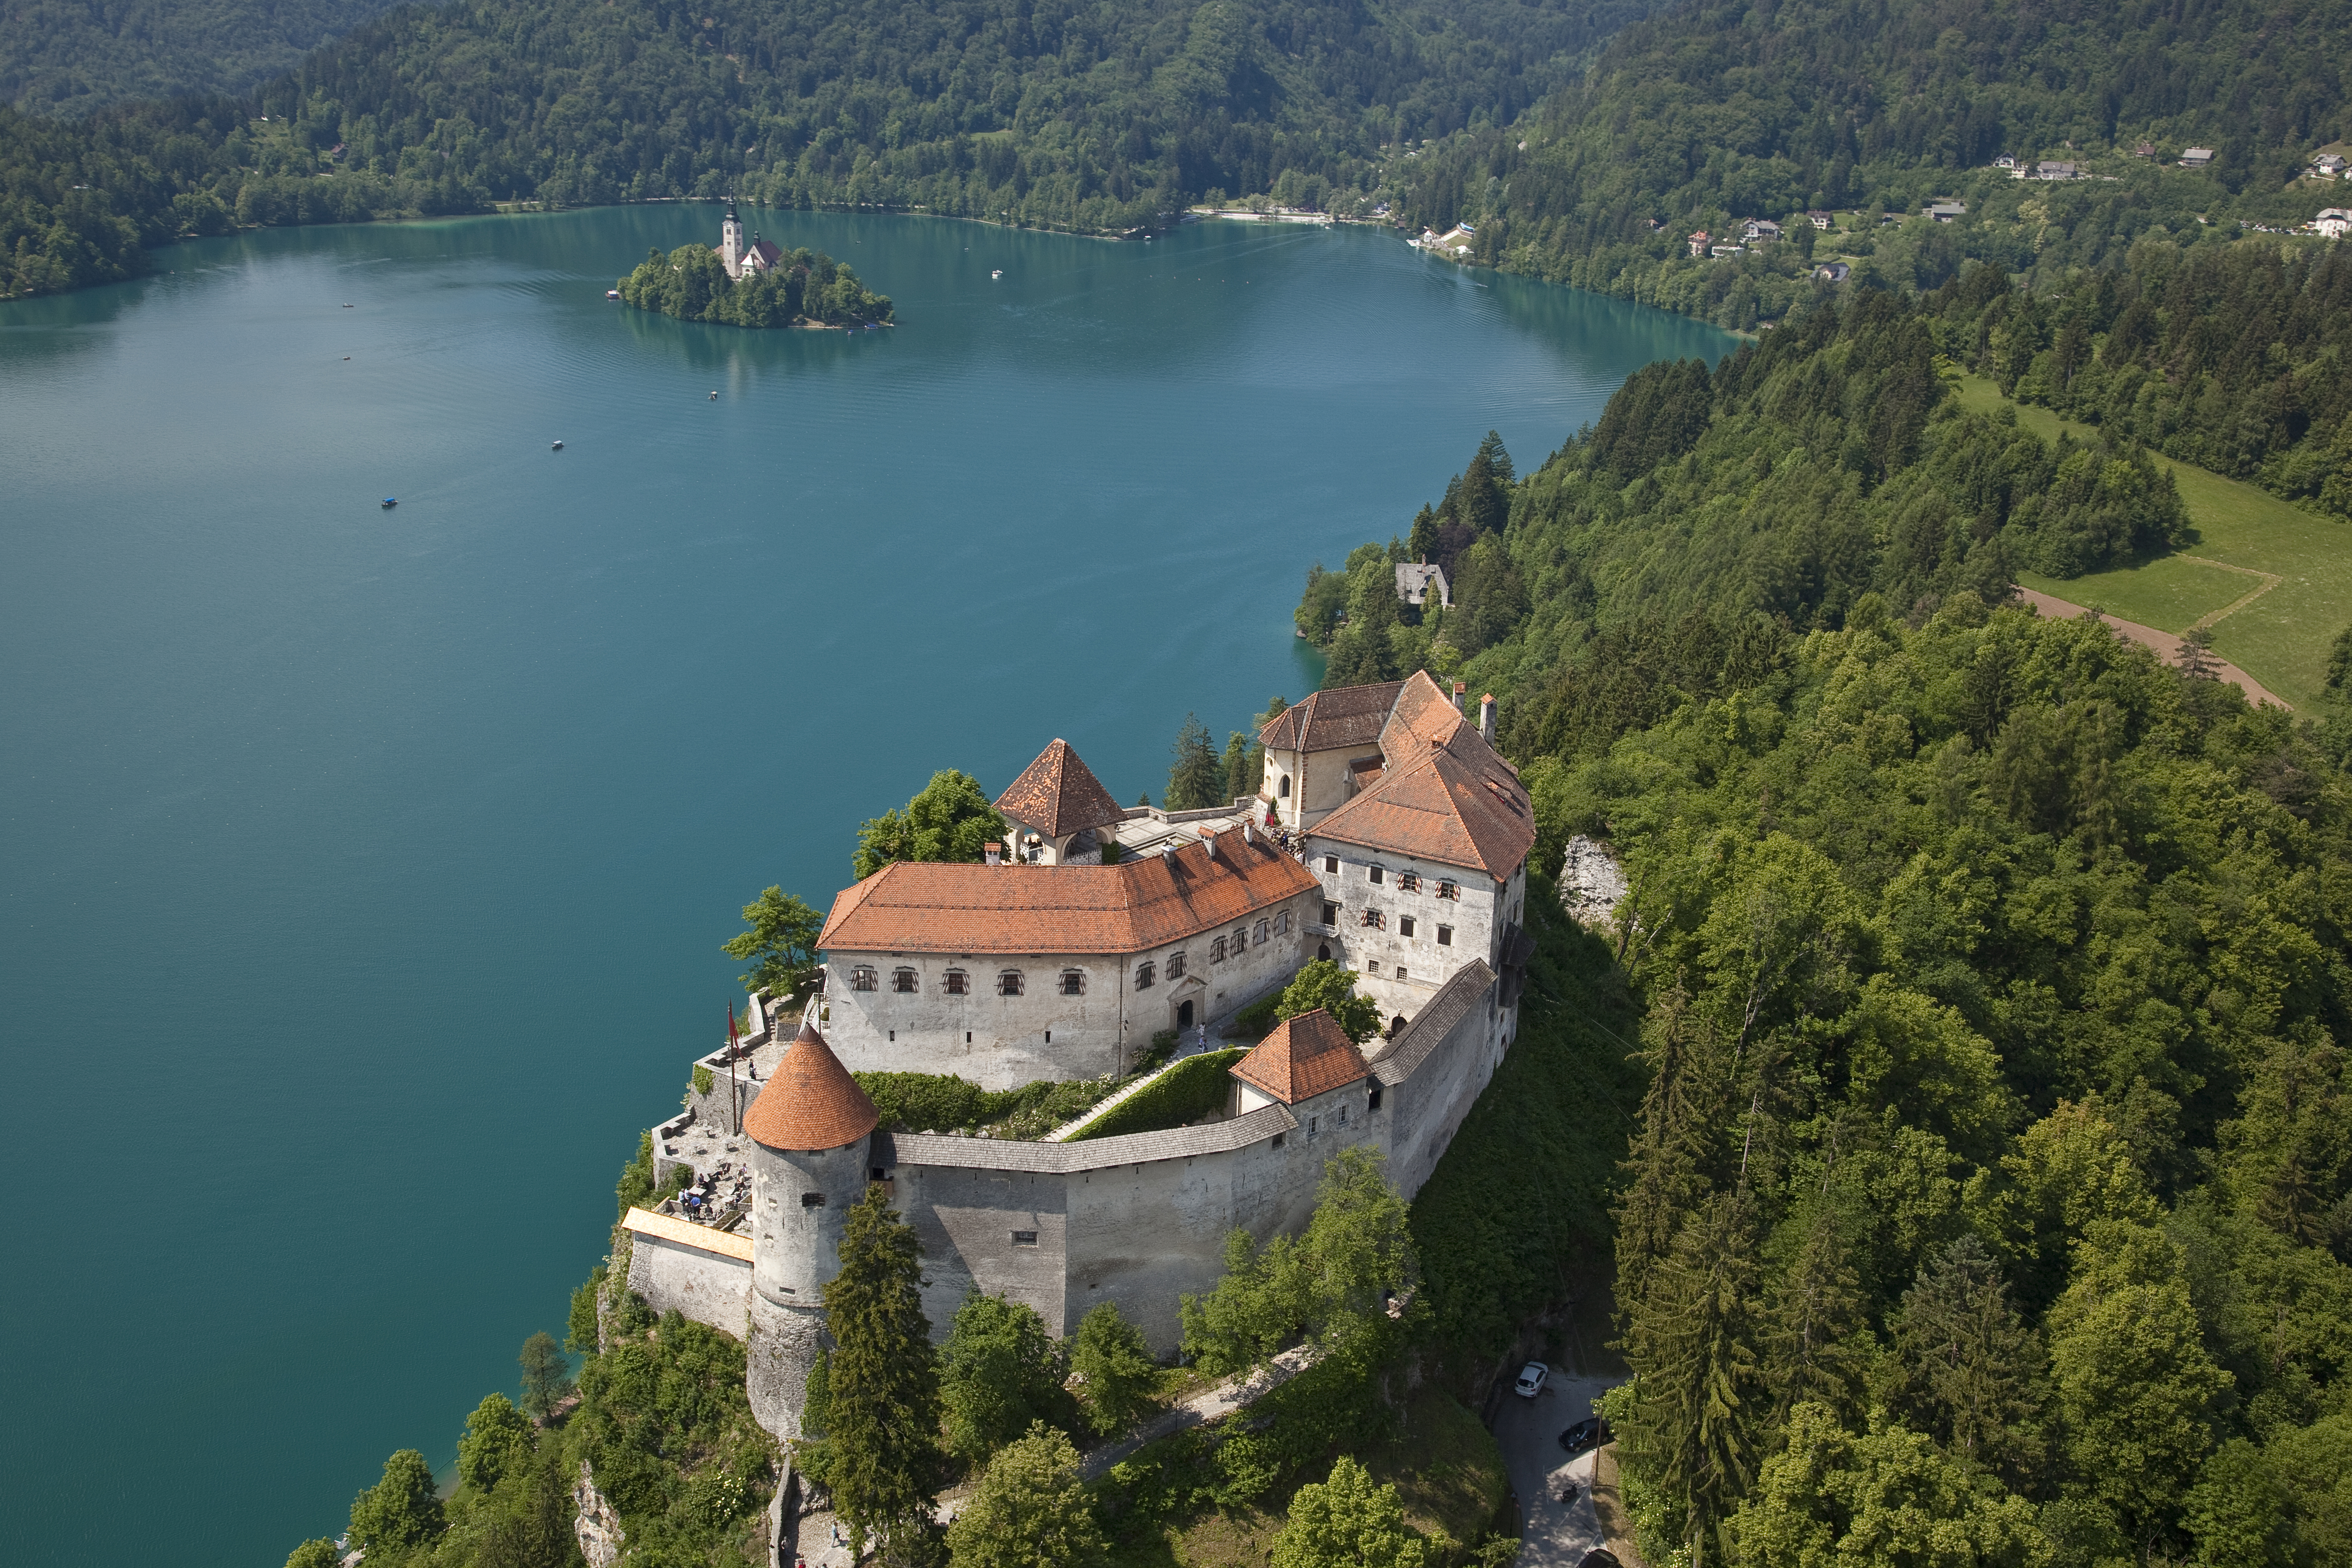 Bled among the 17 best small towns in Europe (Travel + Leisure)